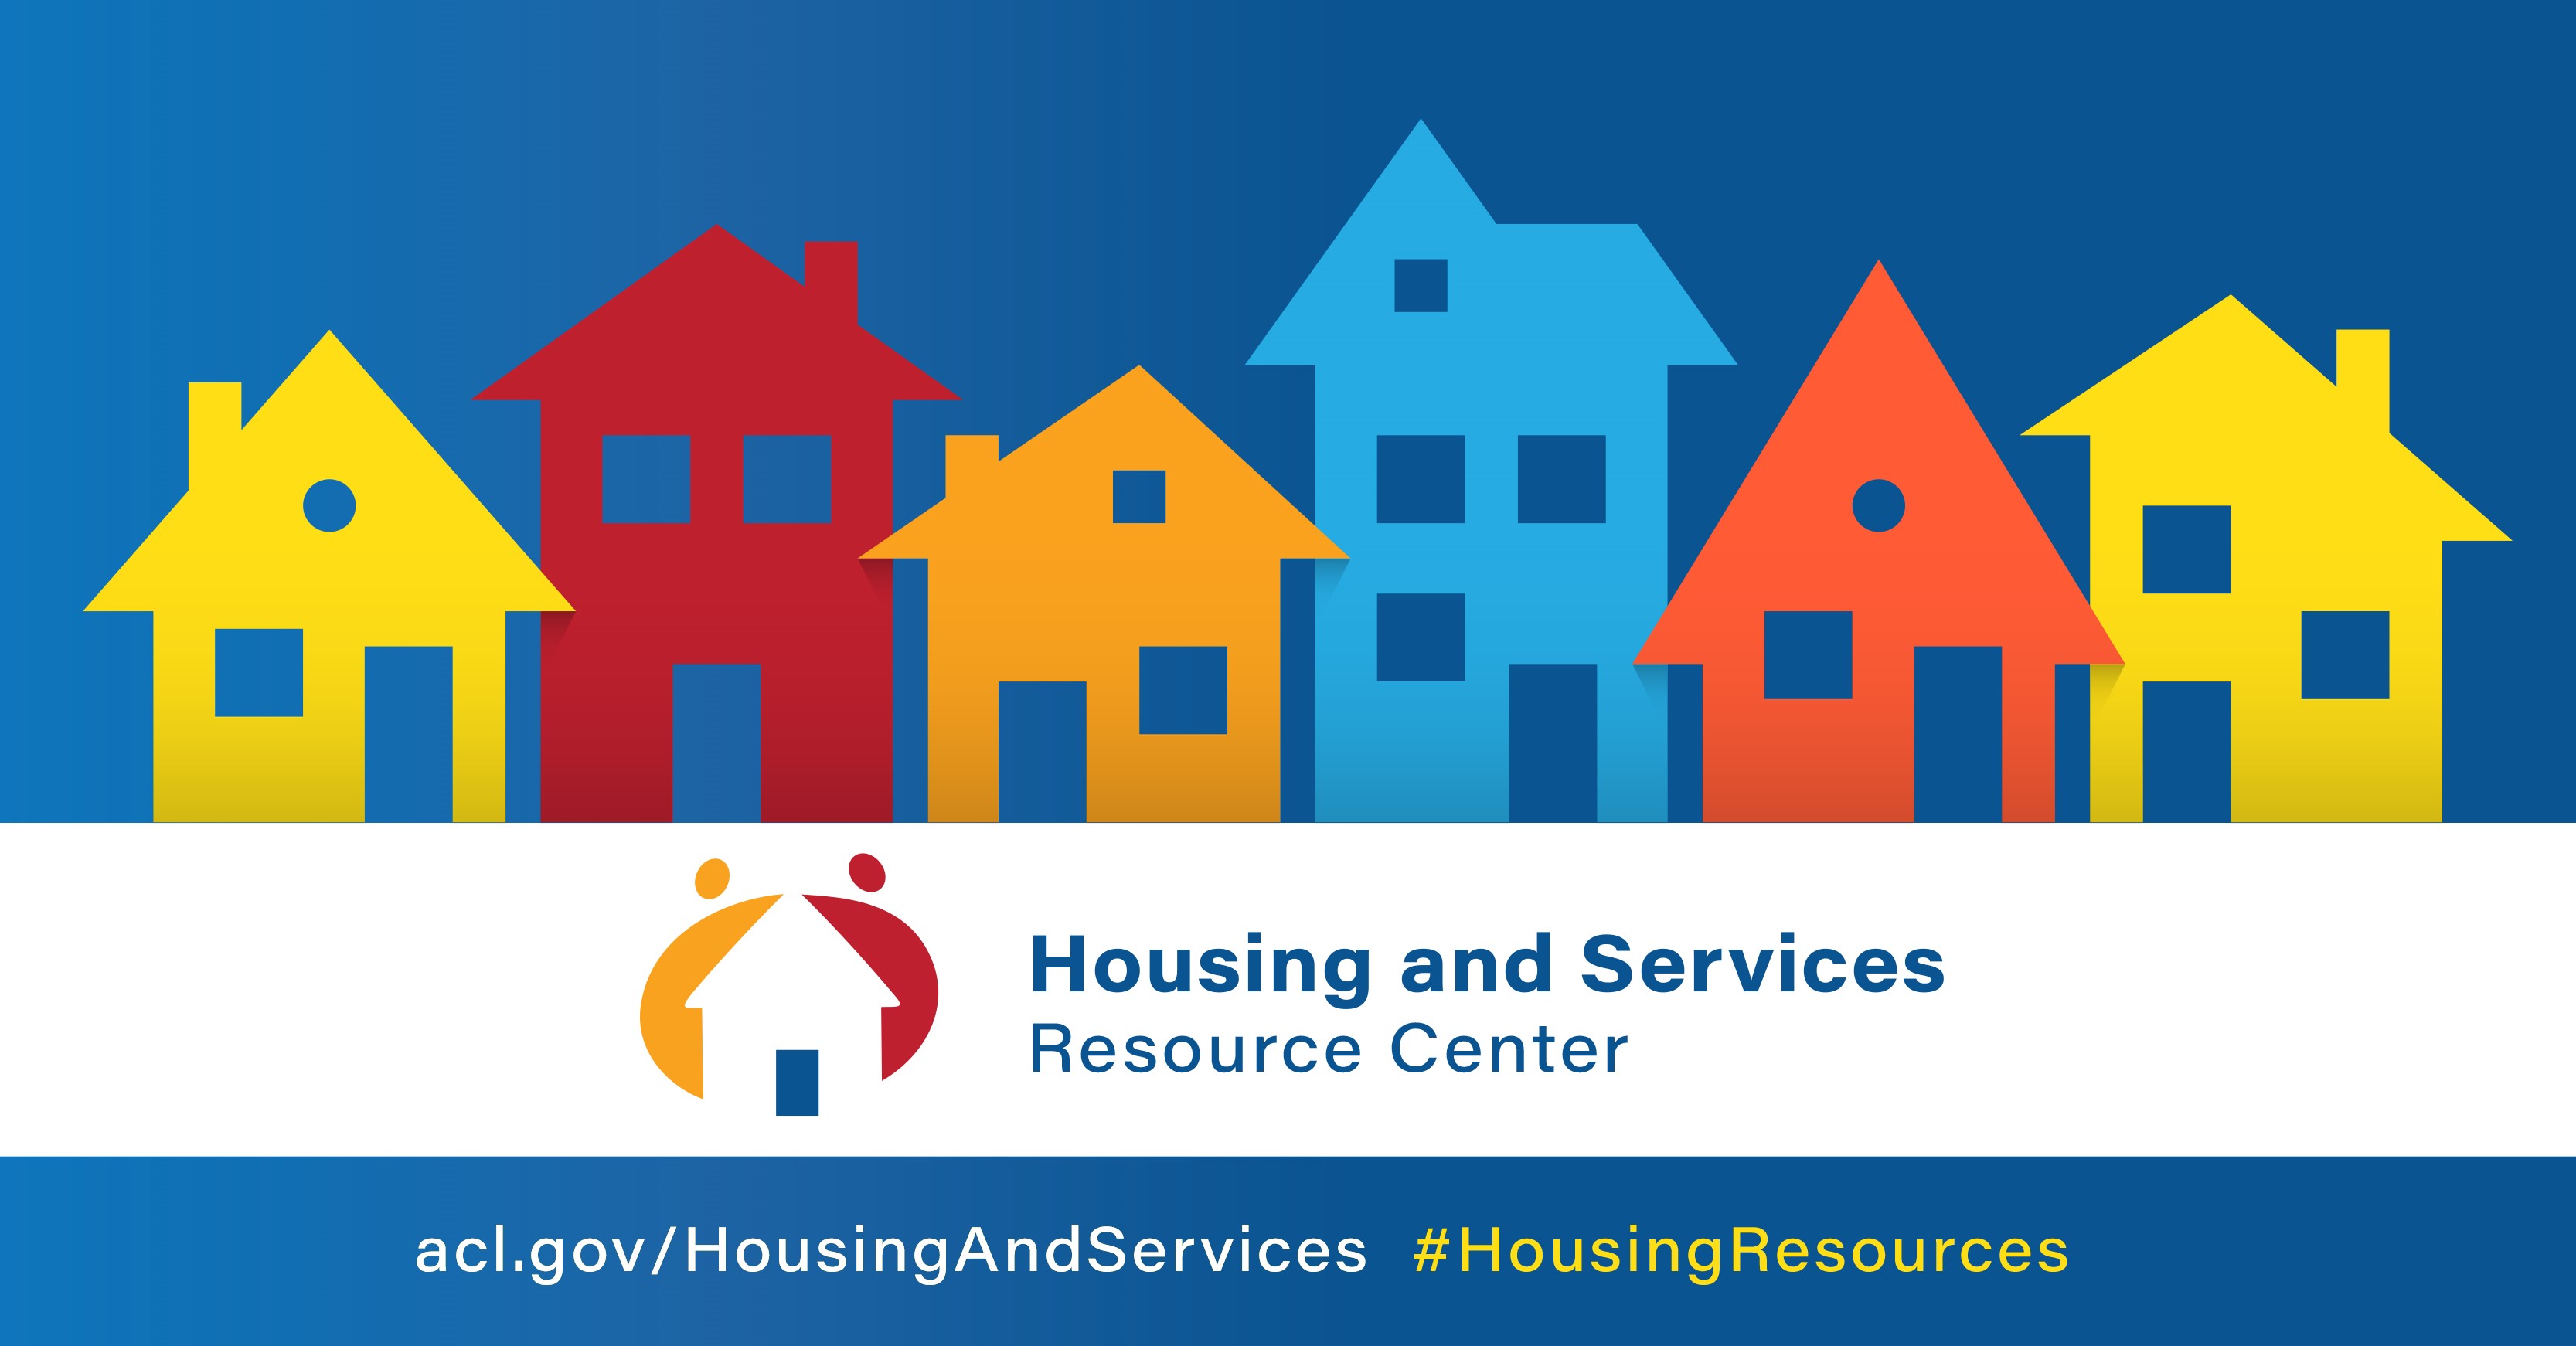 Simple graphic with images of houses that says Housing and Services Resource Center and includes a link to the HSRC website